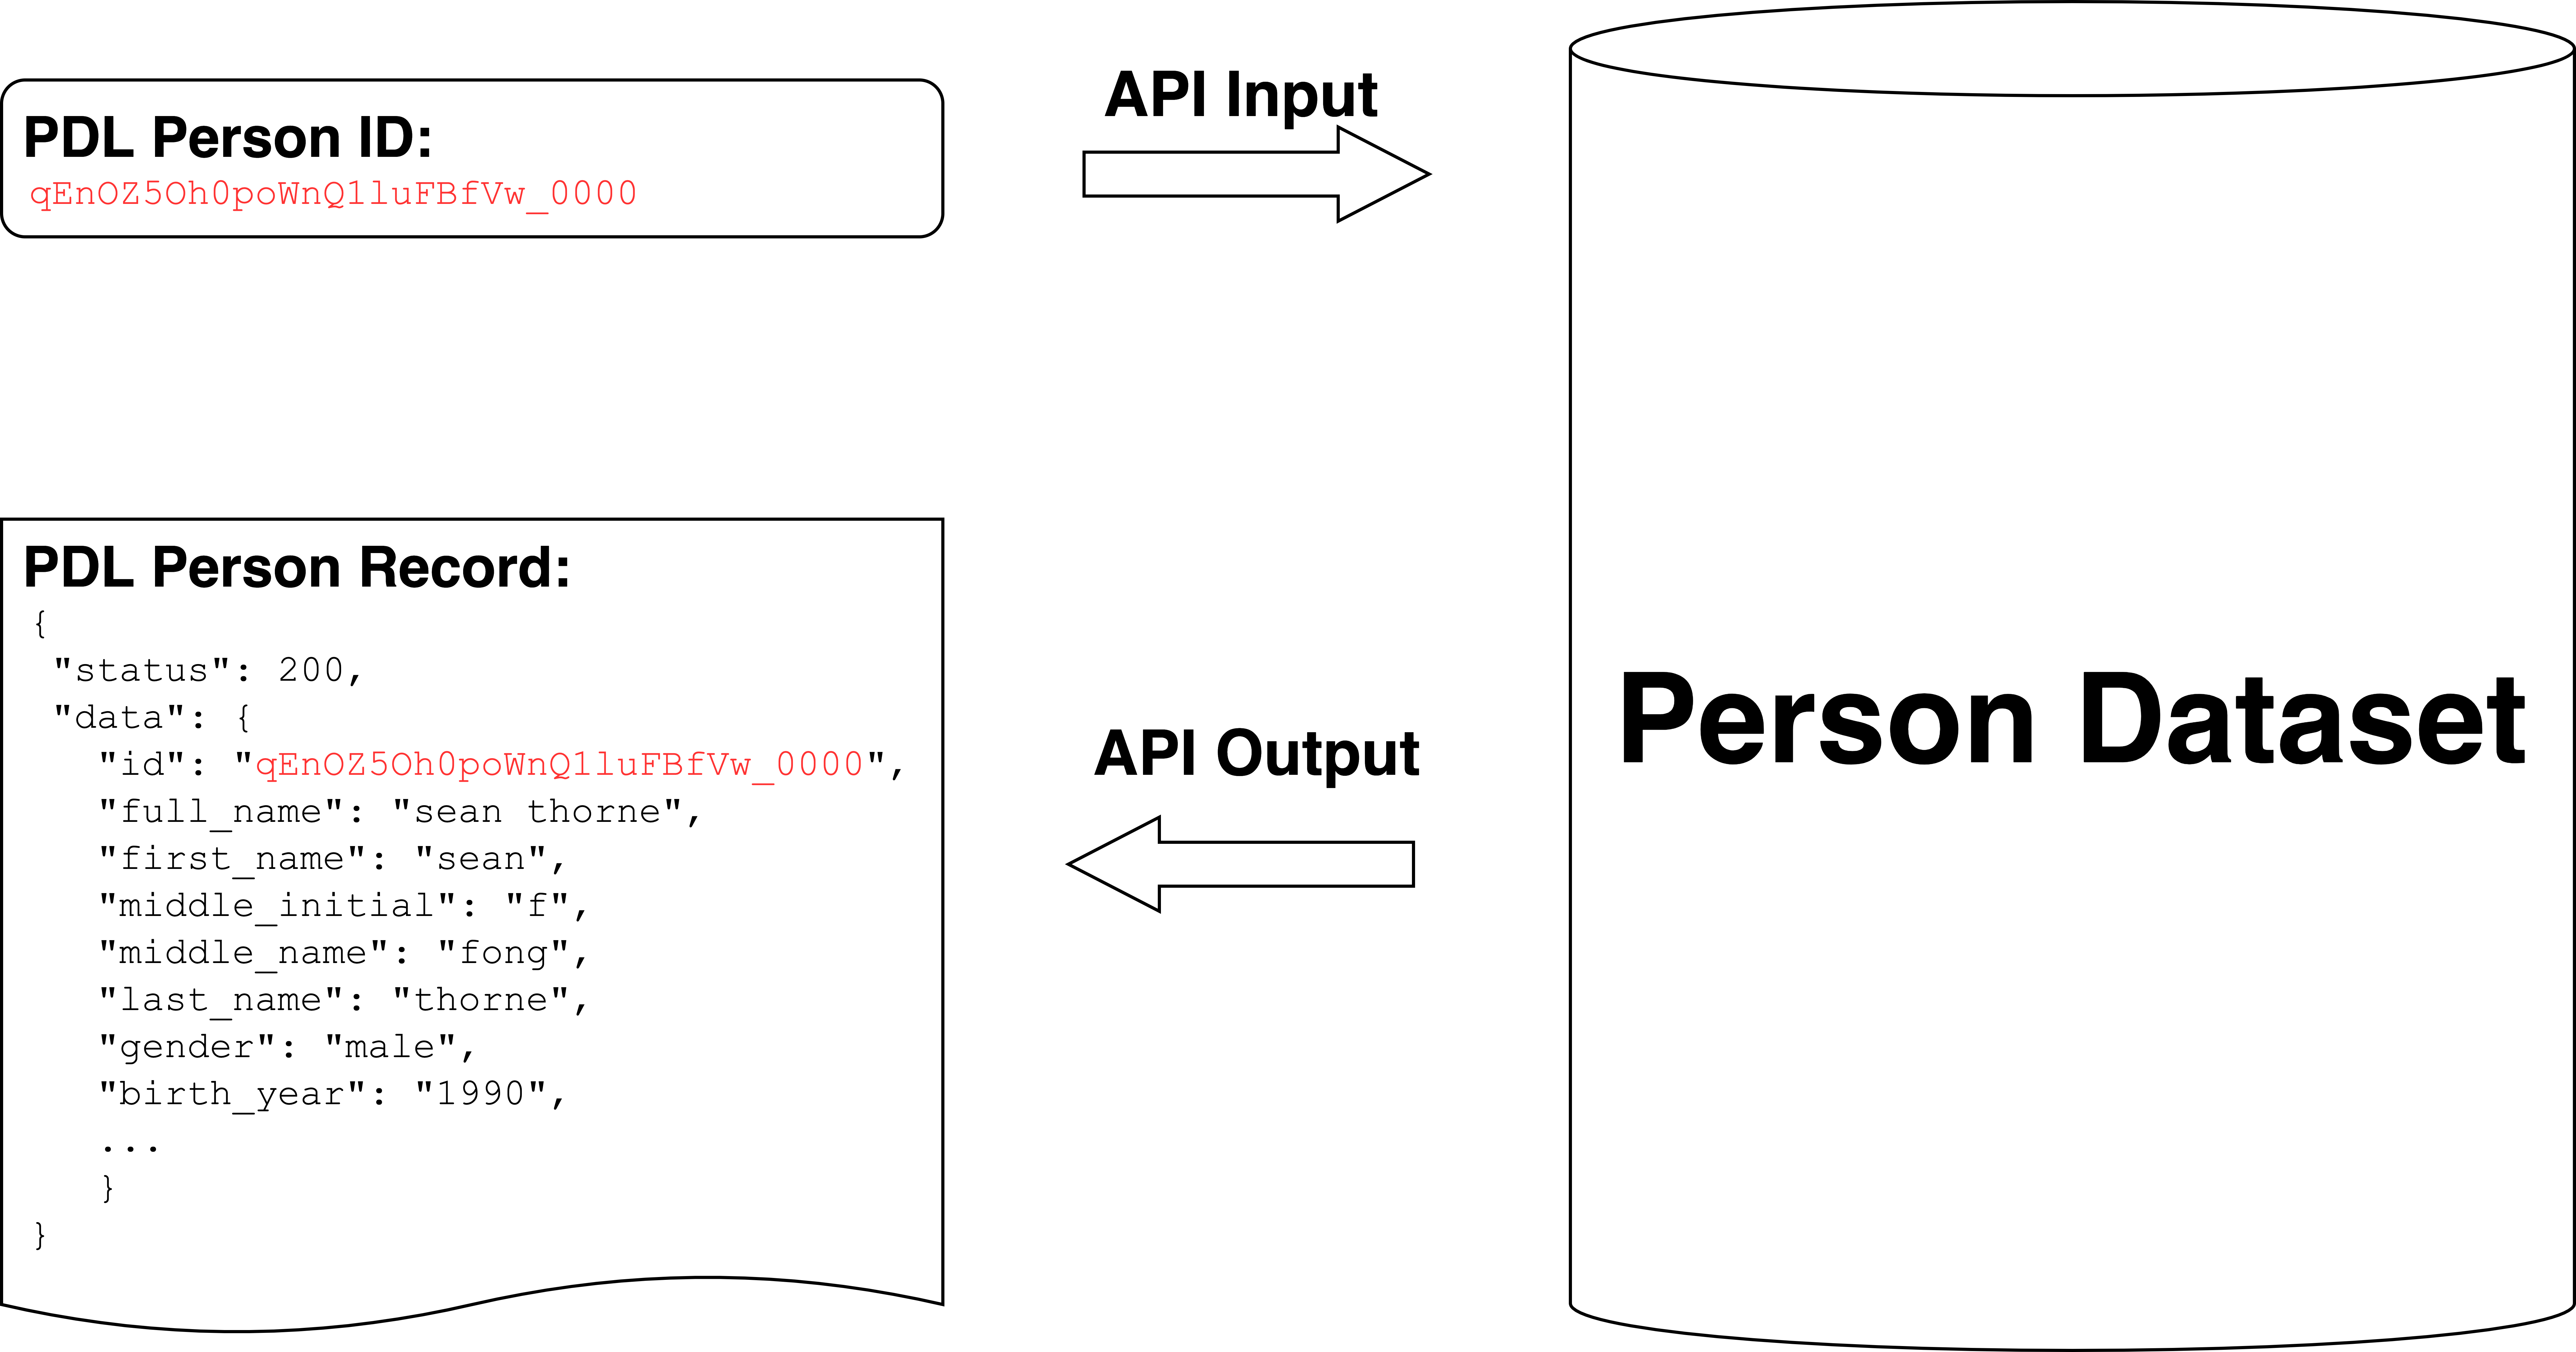 The Person Retrieve API allows you to directly retrieve the most up-to-date person record from our dataset using a [PDL Person ID](doc:person-retrieve-api-input-parameters#person_id)